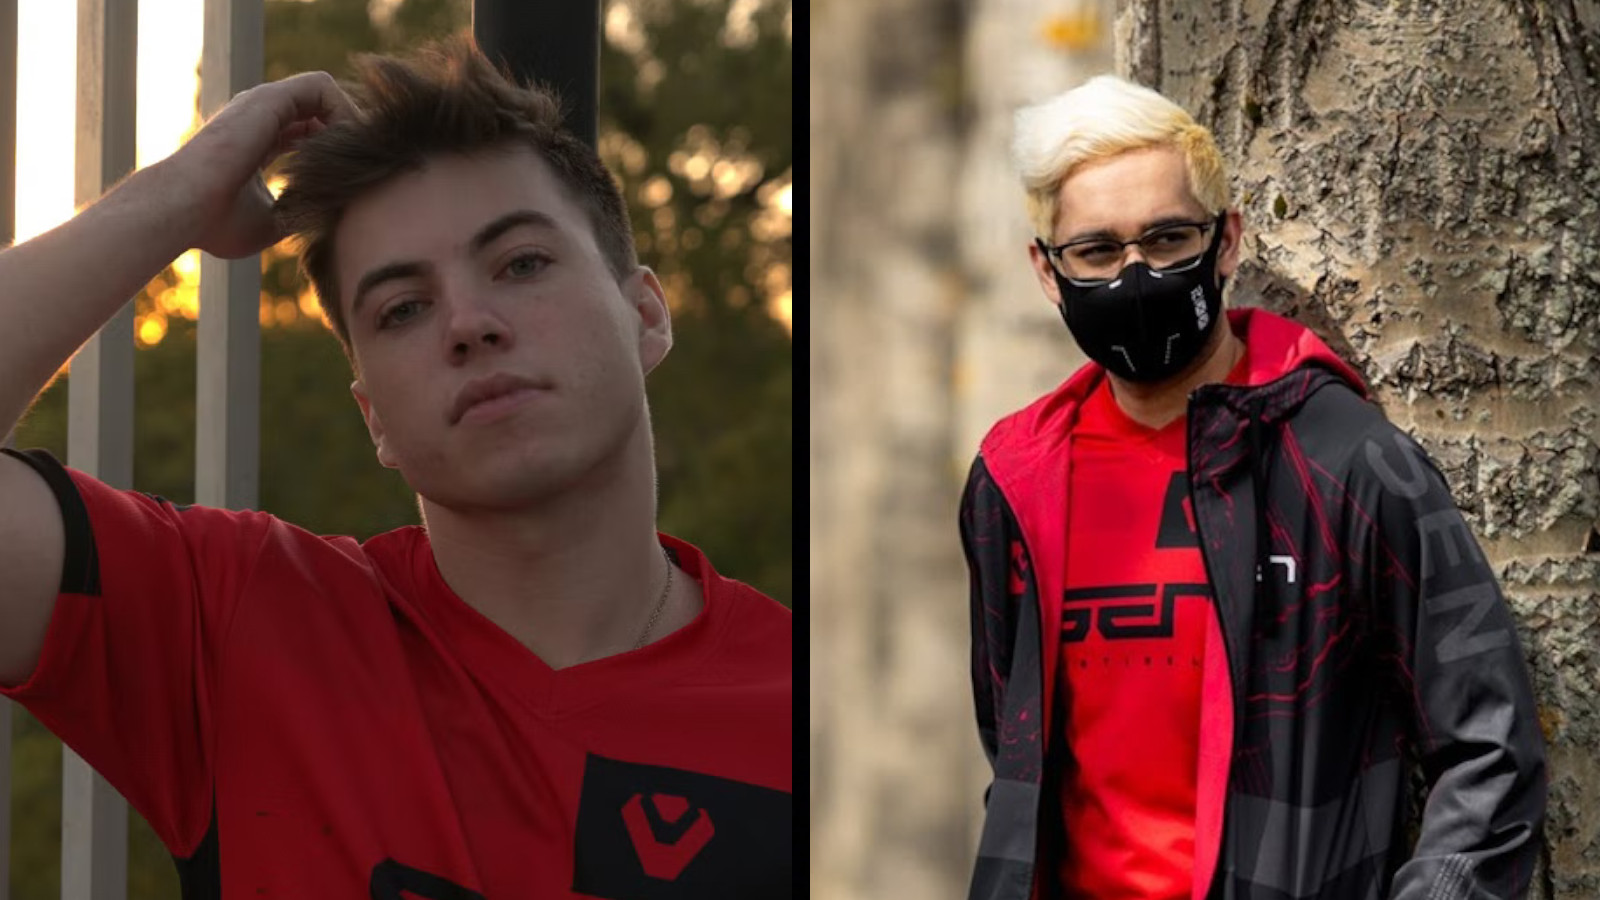 G2 Valorant reportedly signal ShahZaM & dapr with different NA stars – Egaxo